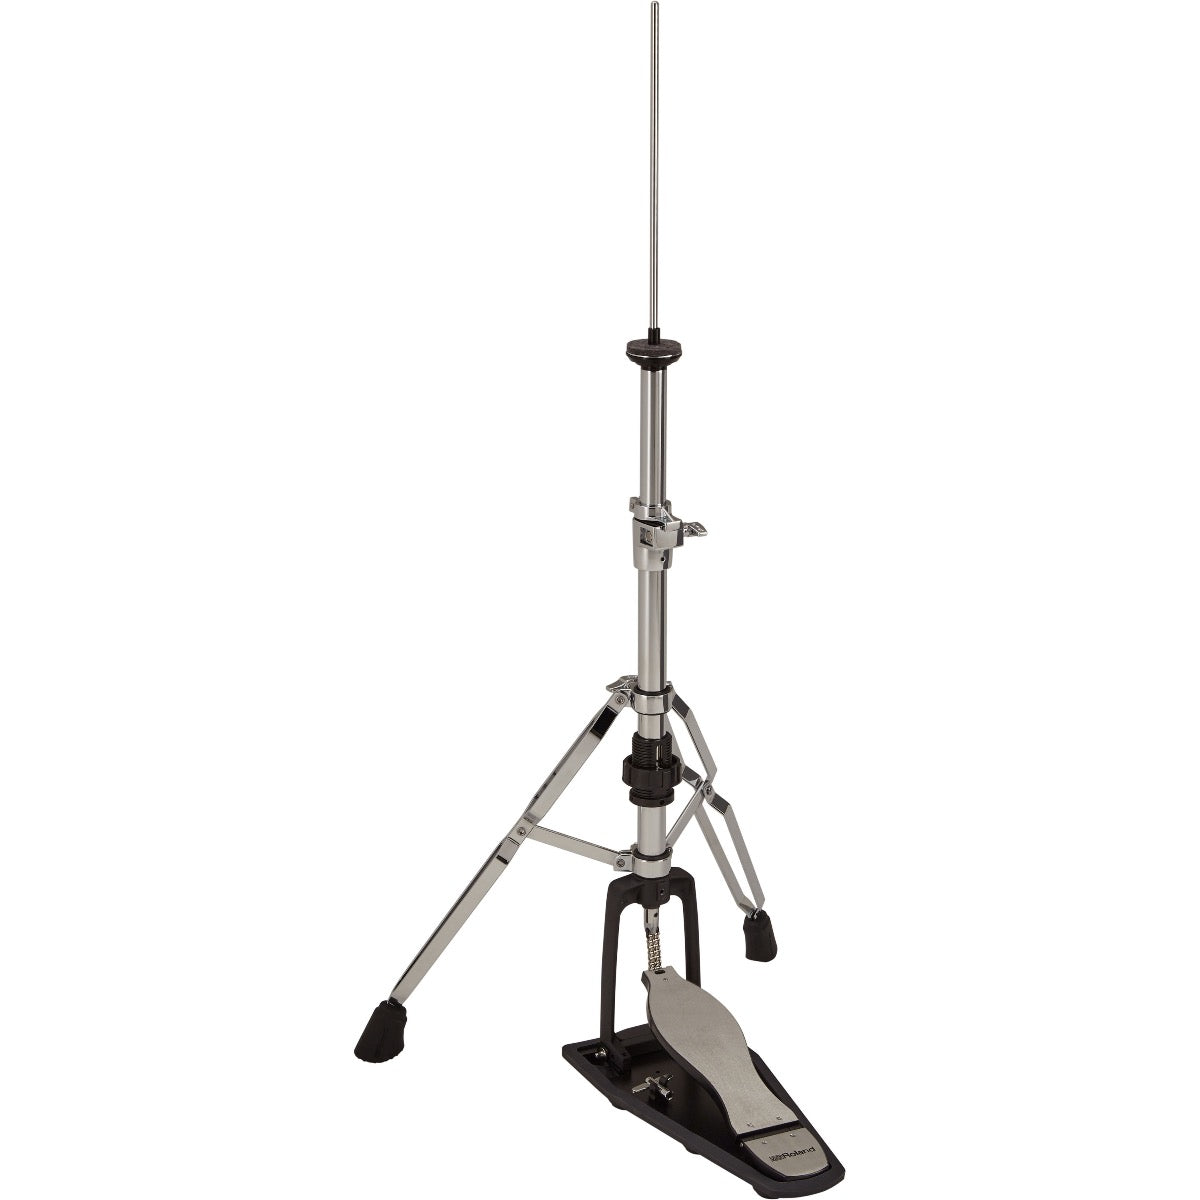 3/4 view of Roland RDH-120A V-Drums Hi-Hat Stand with Noise Eater Technology showing front, top and left side